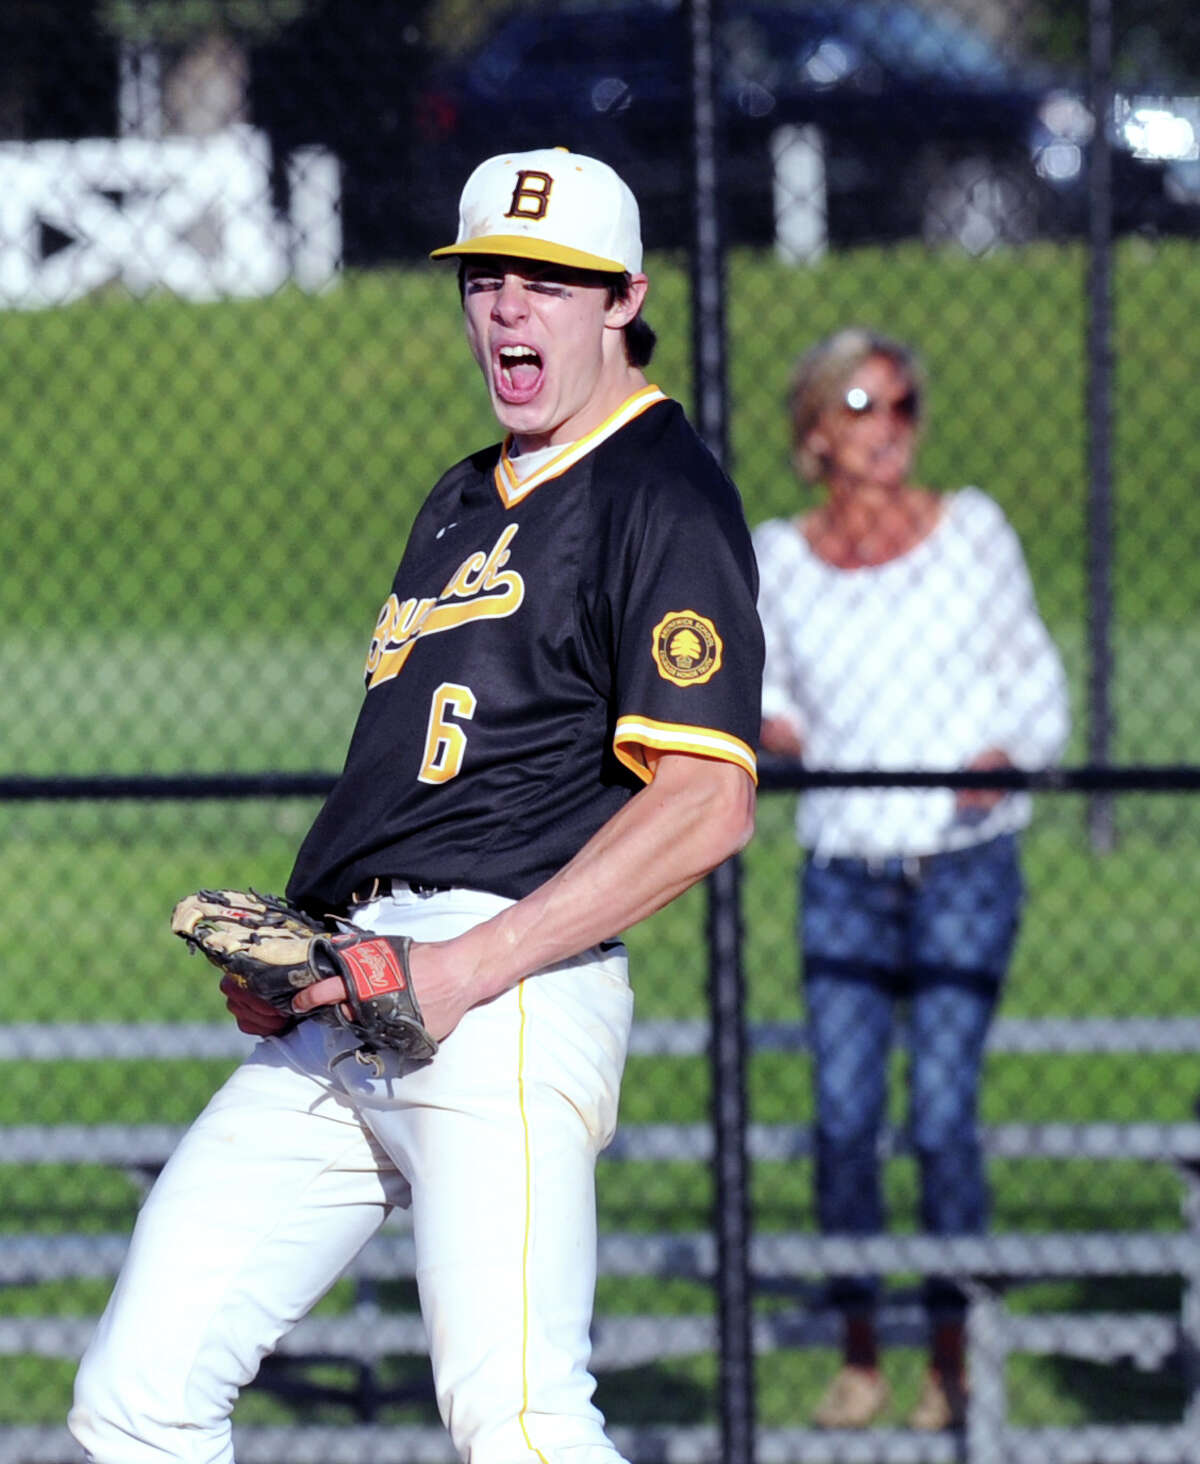 Brunswick relief pitcher Trevor Johnson celebrates after striking out the final Hamden Hall batter in the Bruins’ 7-1 win over Hamden Hall in the FAA championship in Greenwich.